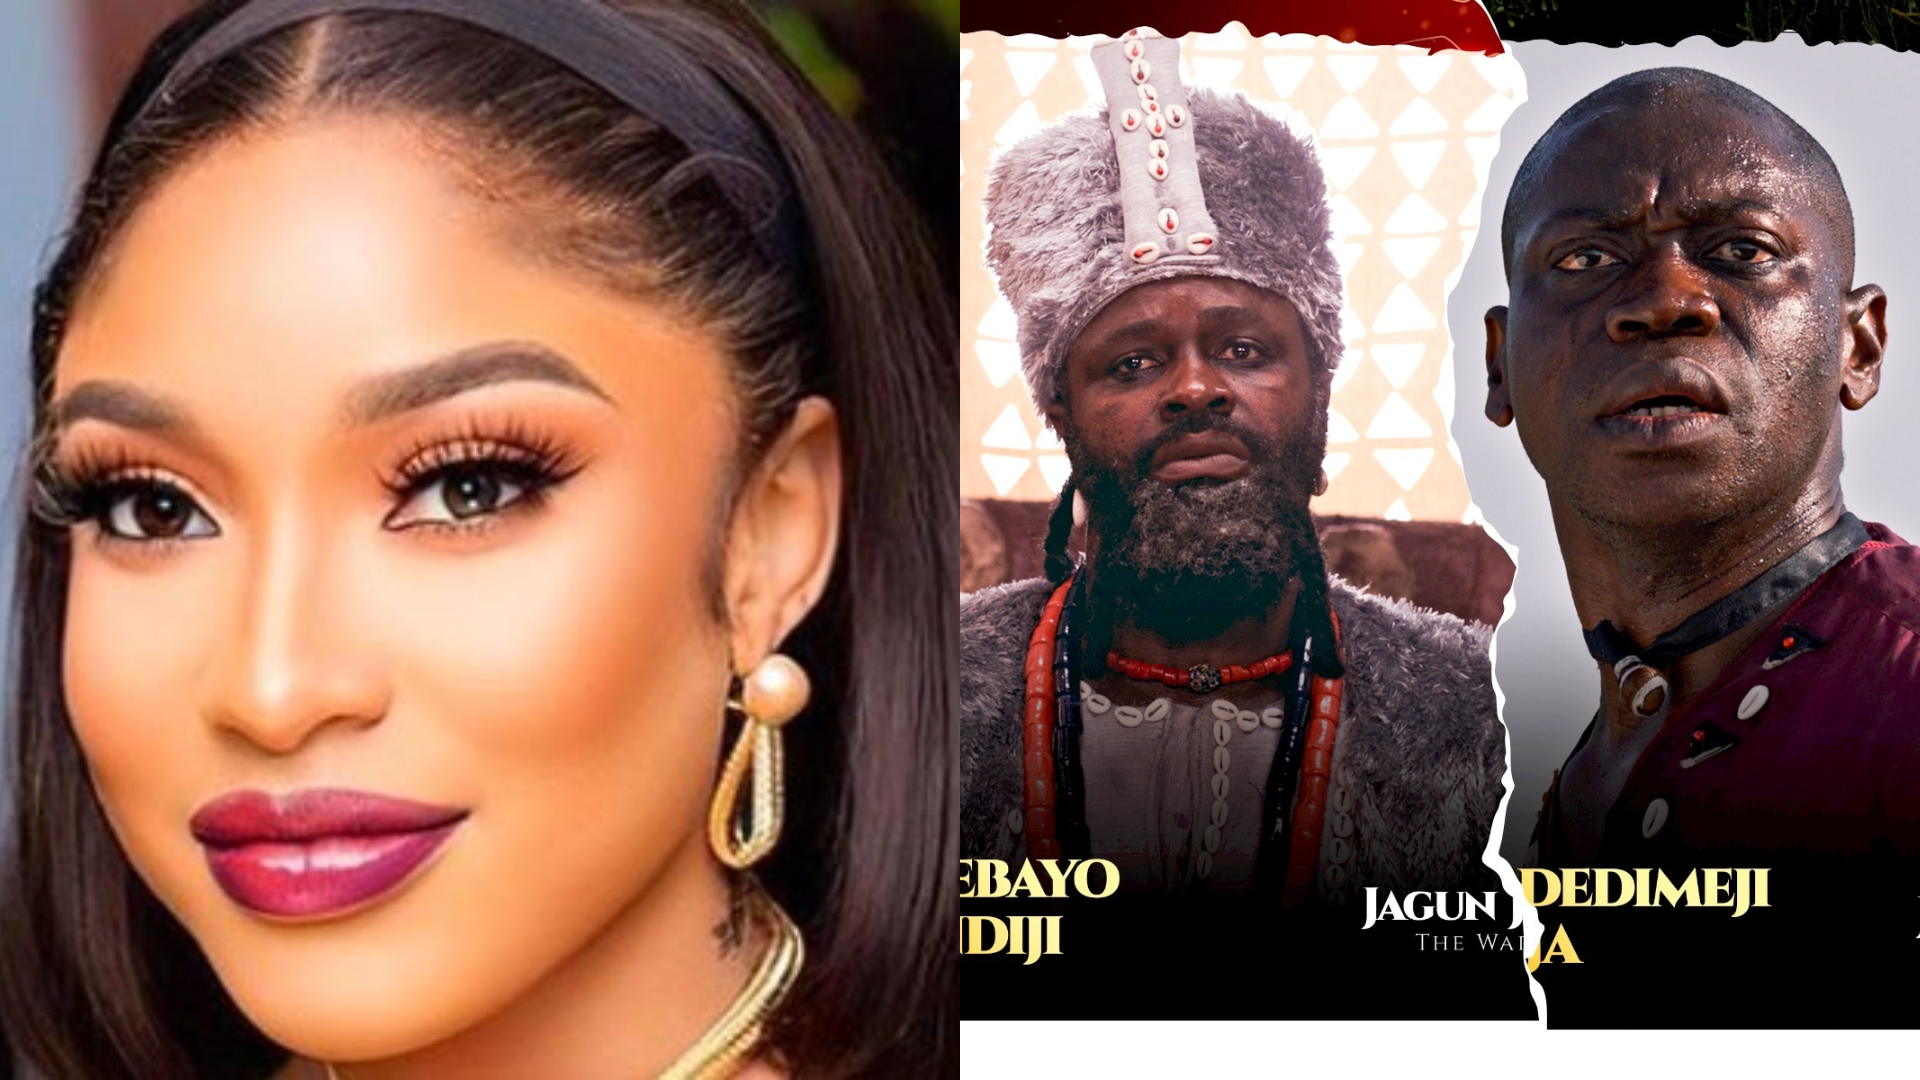 "It's been 10/12 years I watched Nigerian movies" - Tonto Dikeh stirs reactions on her review of Jagun Jagun movie